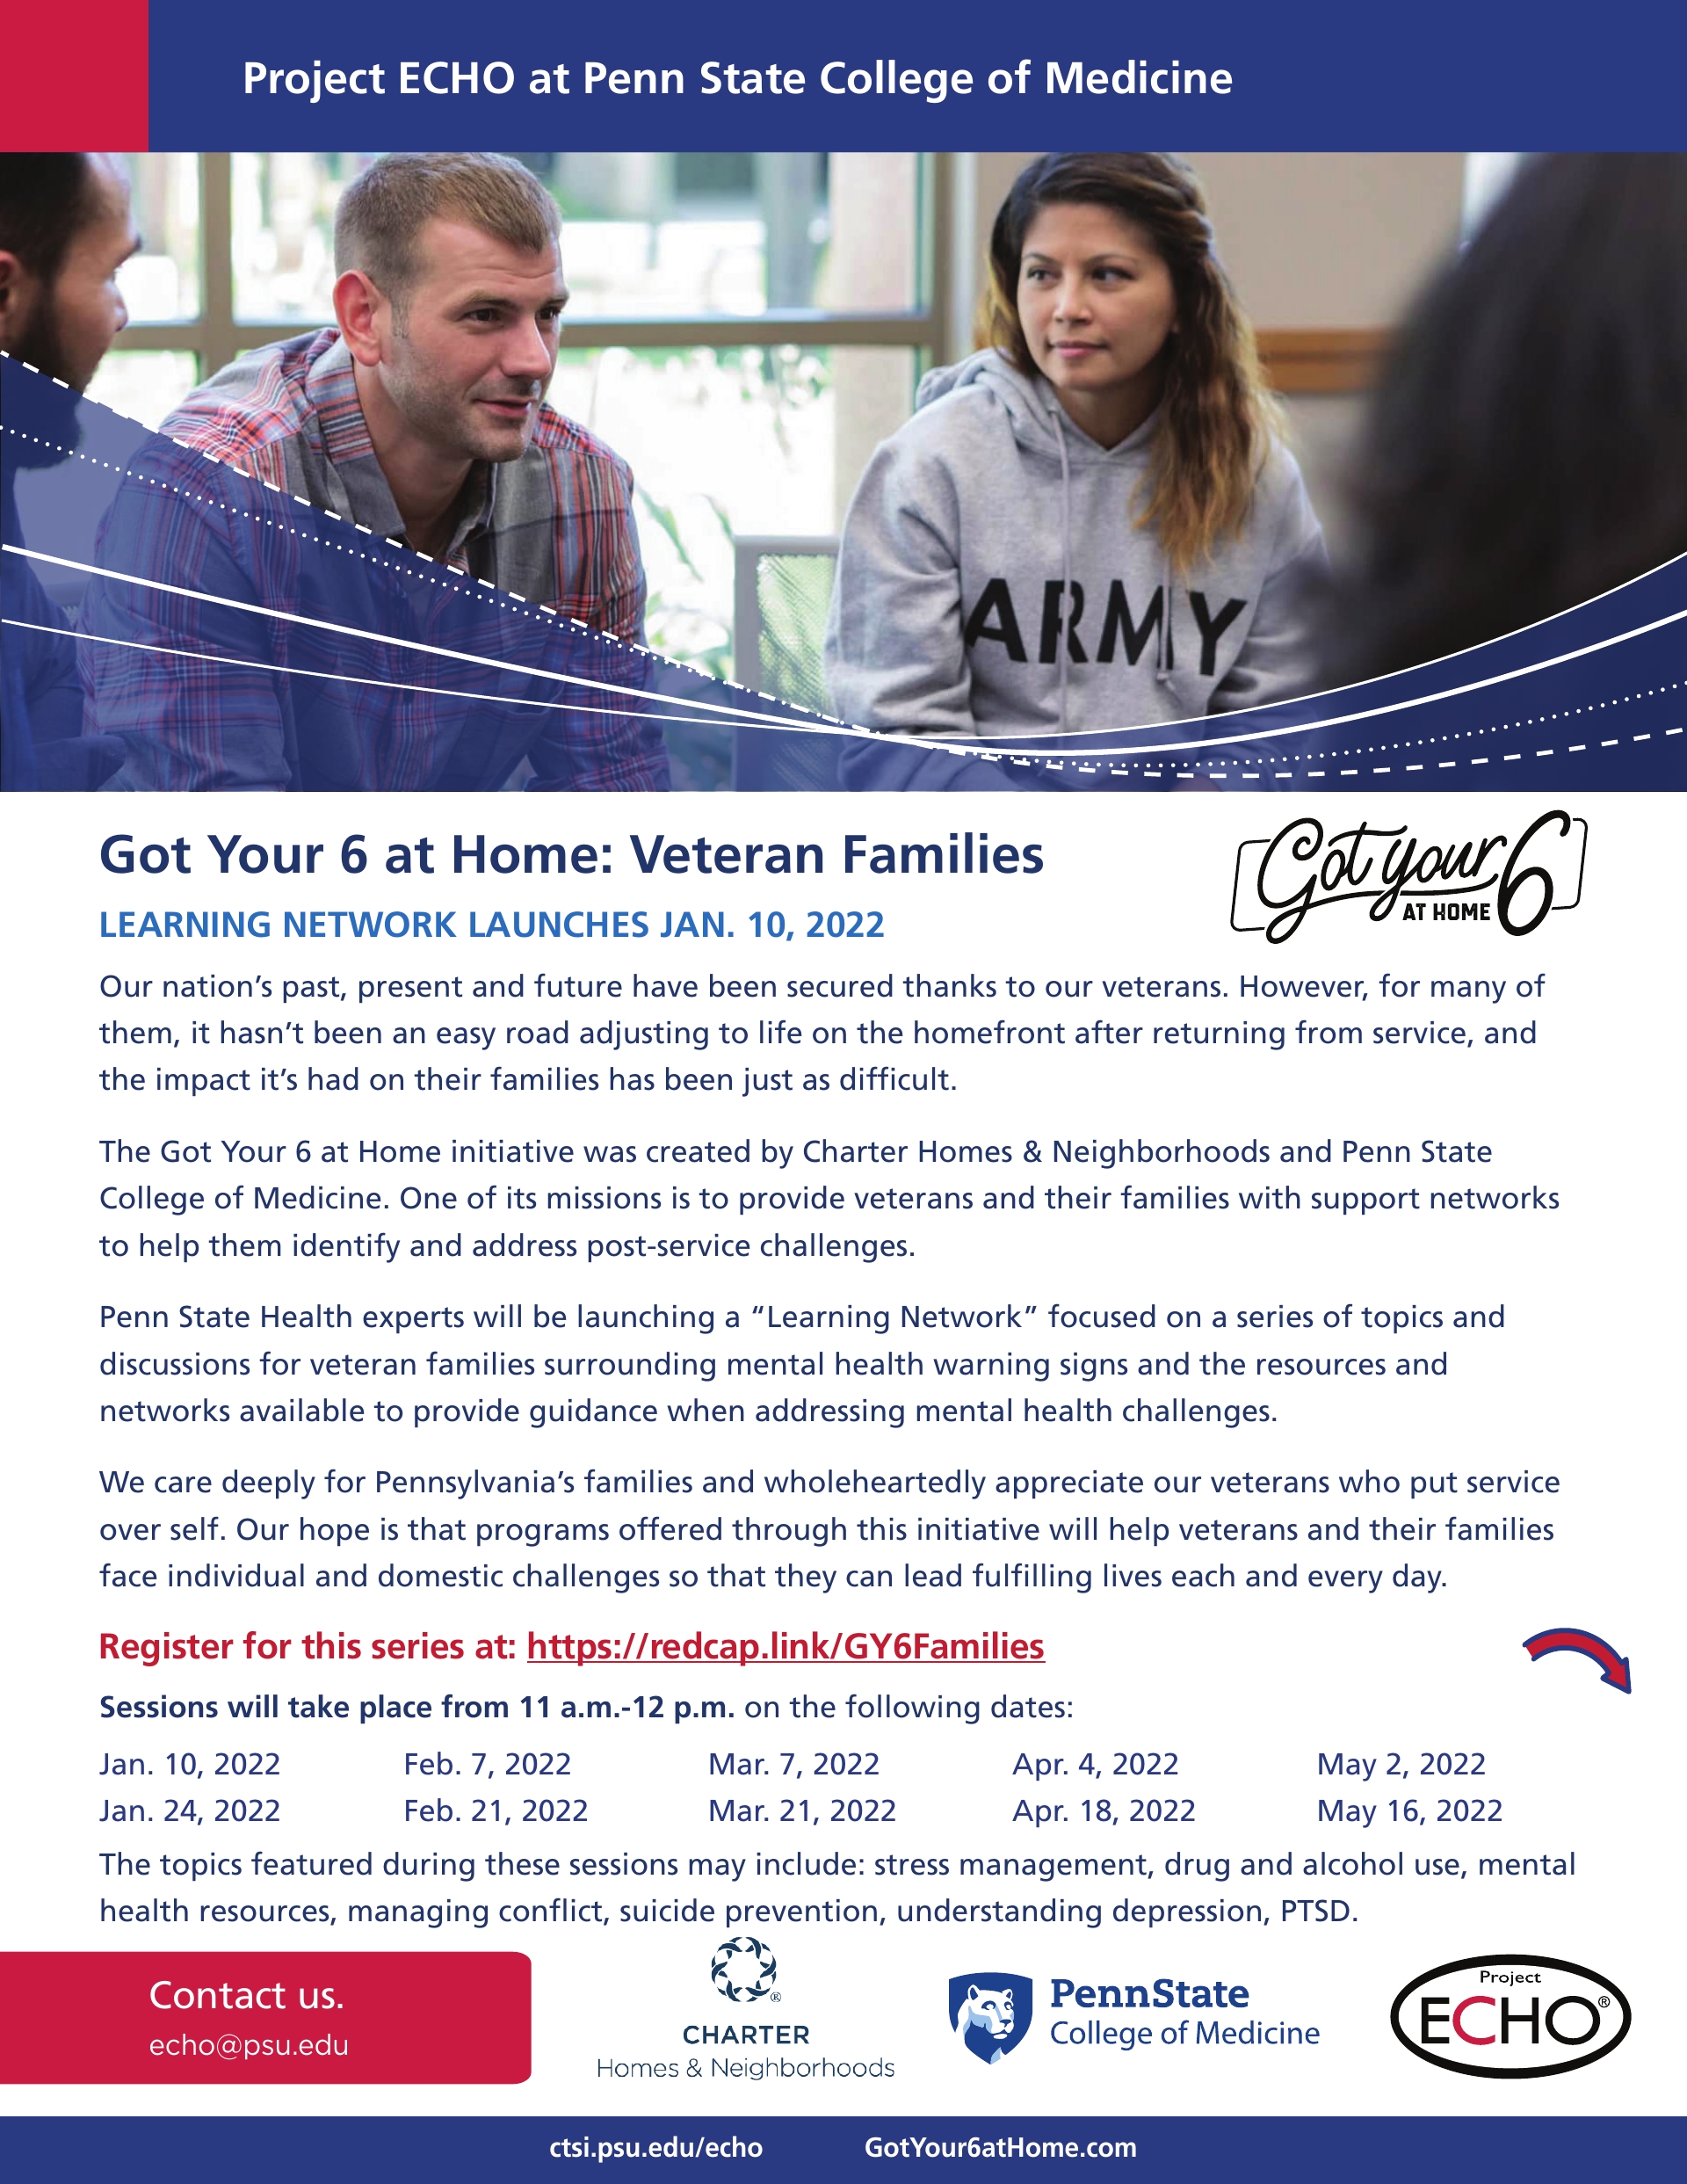 PENN STATE Launches LEARNING NETWORK for Families of Veterans January thru May 2022